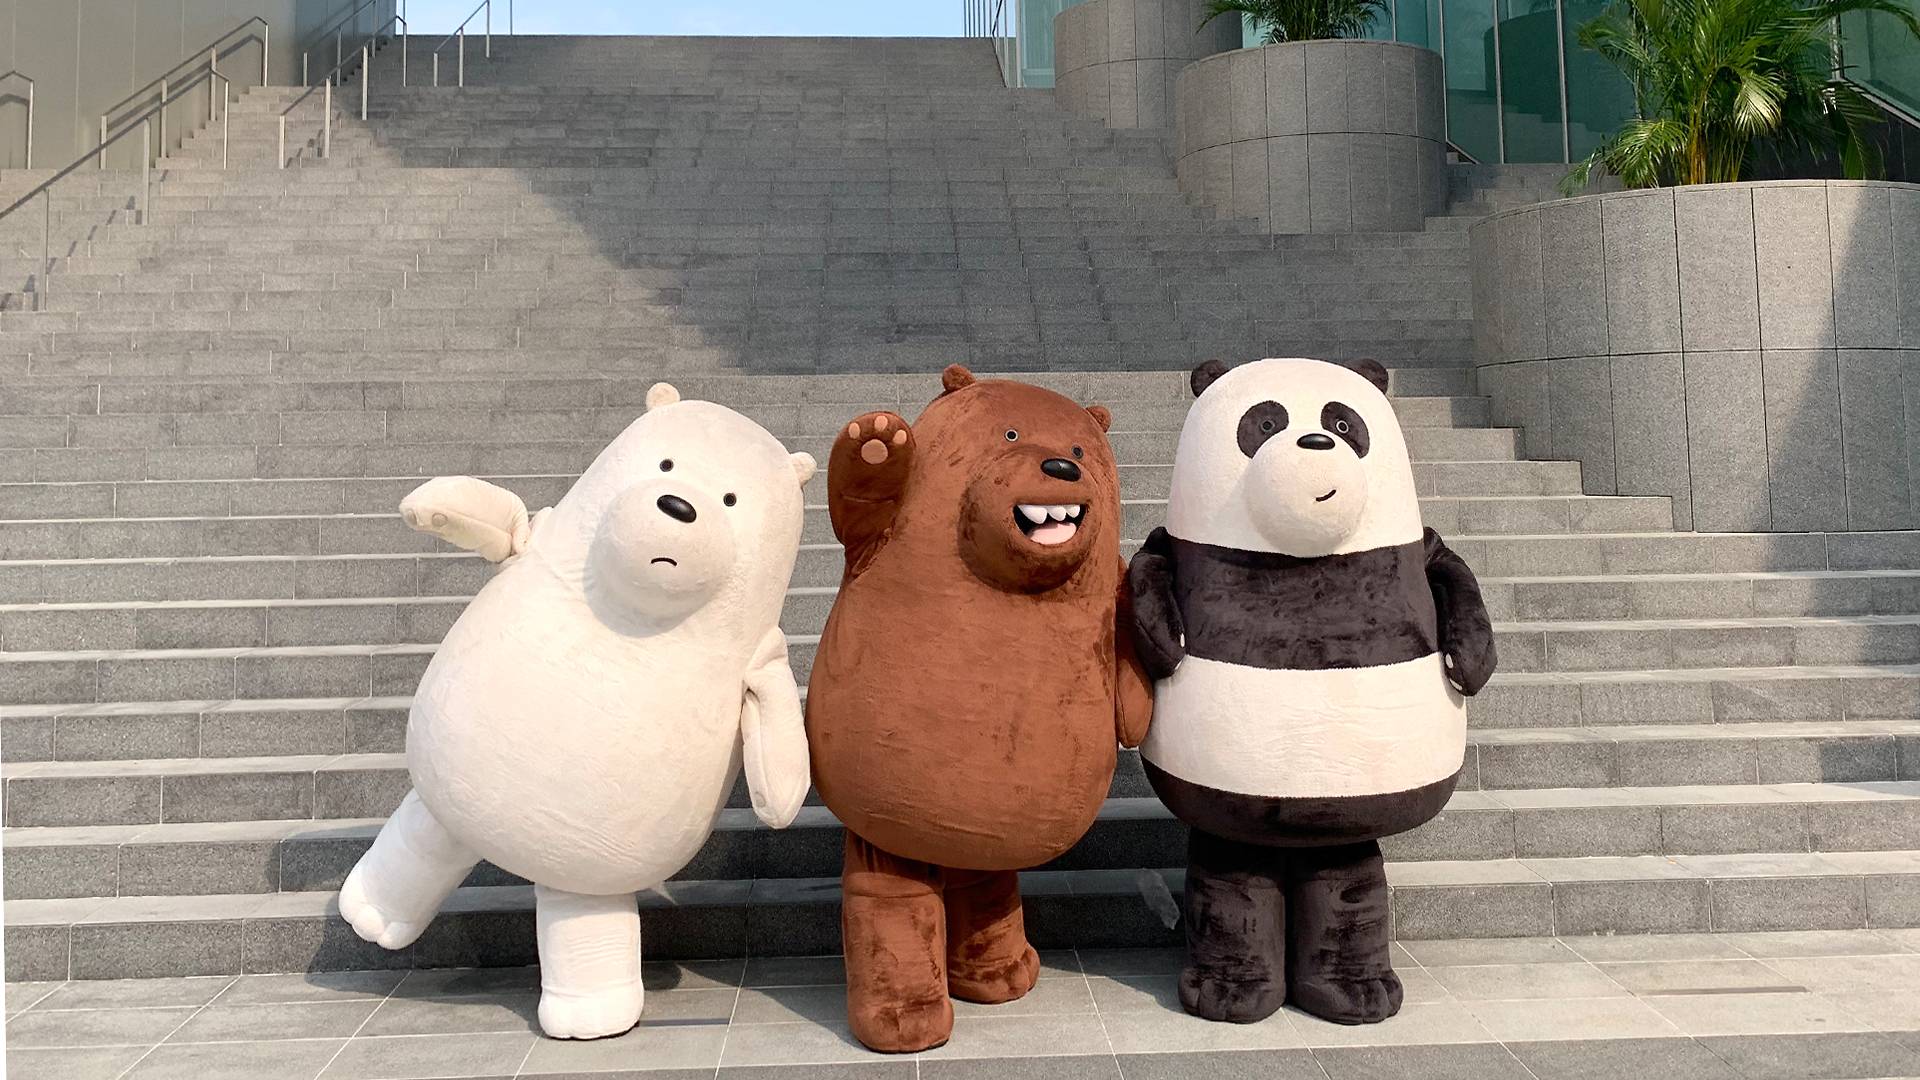 A 'We Bare Bears' Themed Christmas in Malaysia That's Breaking a Nationwide Record?! Here's What We Know! - WORLD OF BUZZ 2